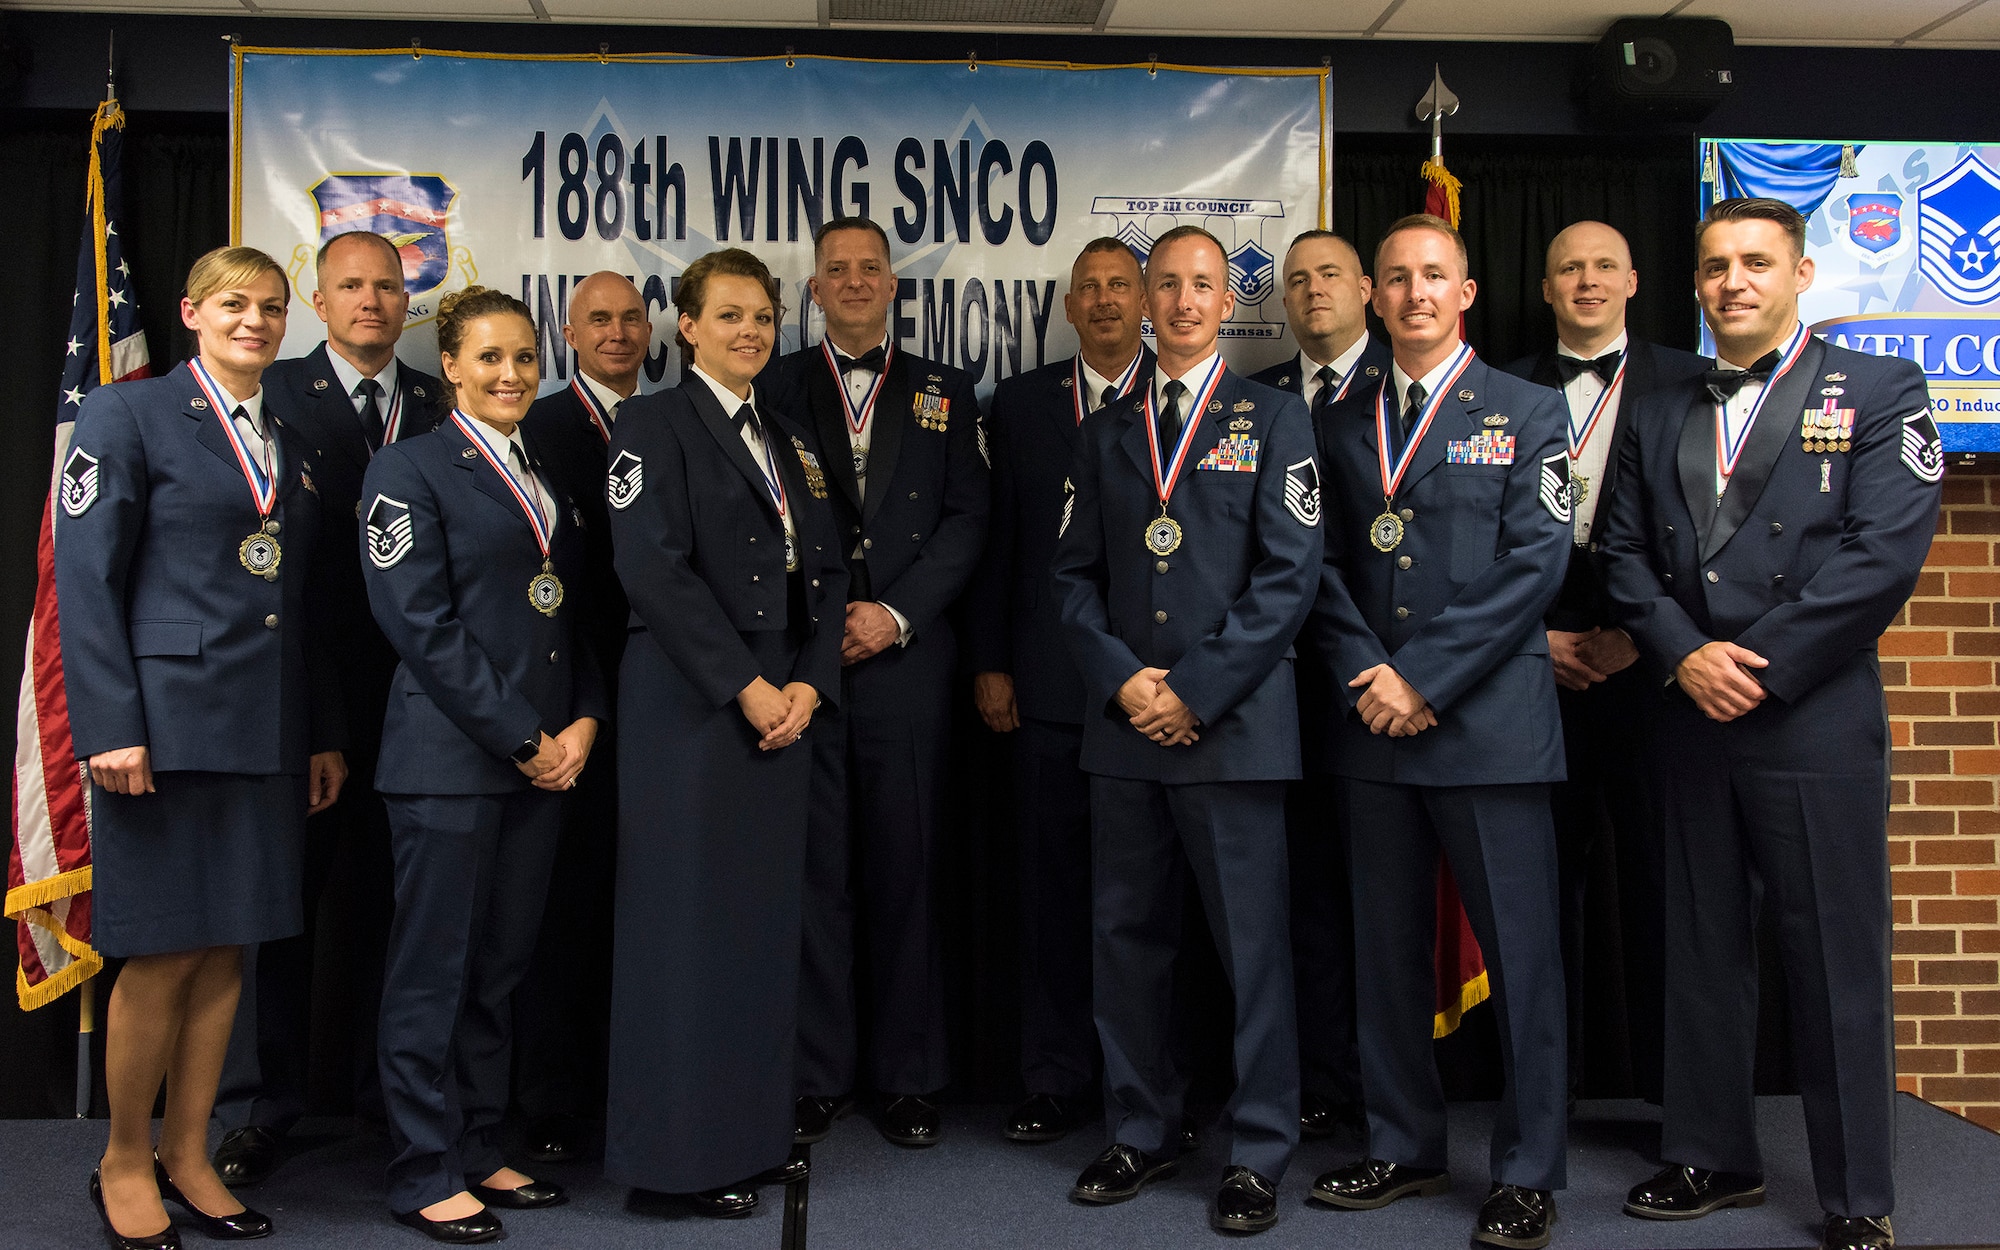 New senior non-commissioned officers with the 188th Wing, Arkansas Air National Guard, pose for a photo during the wing's inaugural Senior Non-commissioned Officer Induction Ceremony, held at Ebbing Air National Guard Base, Ark., June 2, 2018. The wing celebrated the accomplishments of its newest senior NCOs during the evening's event. (U.S. Air National Guard photo by Tech. Sgt. John E. Hillier)